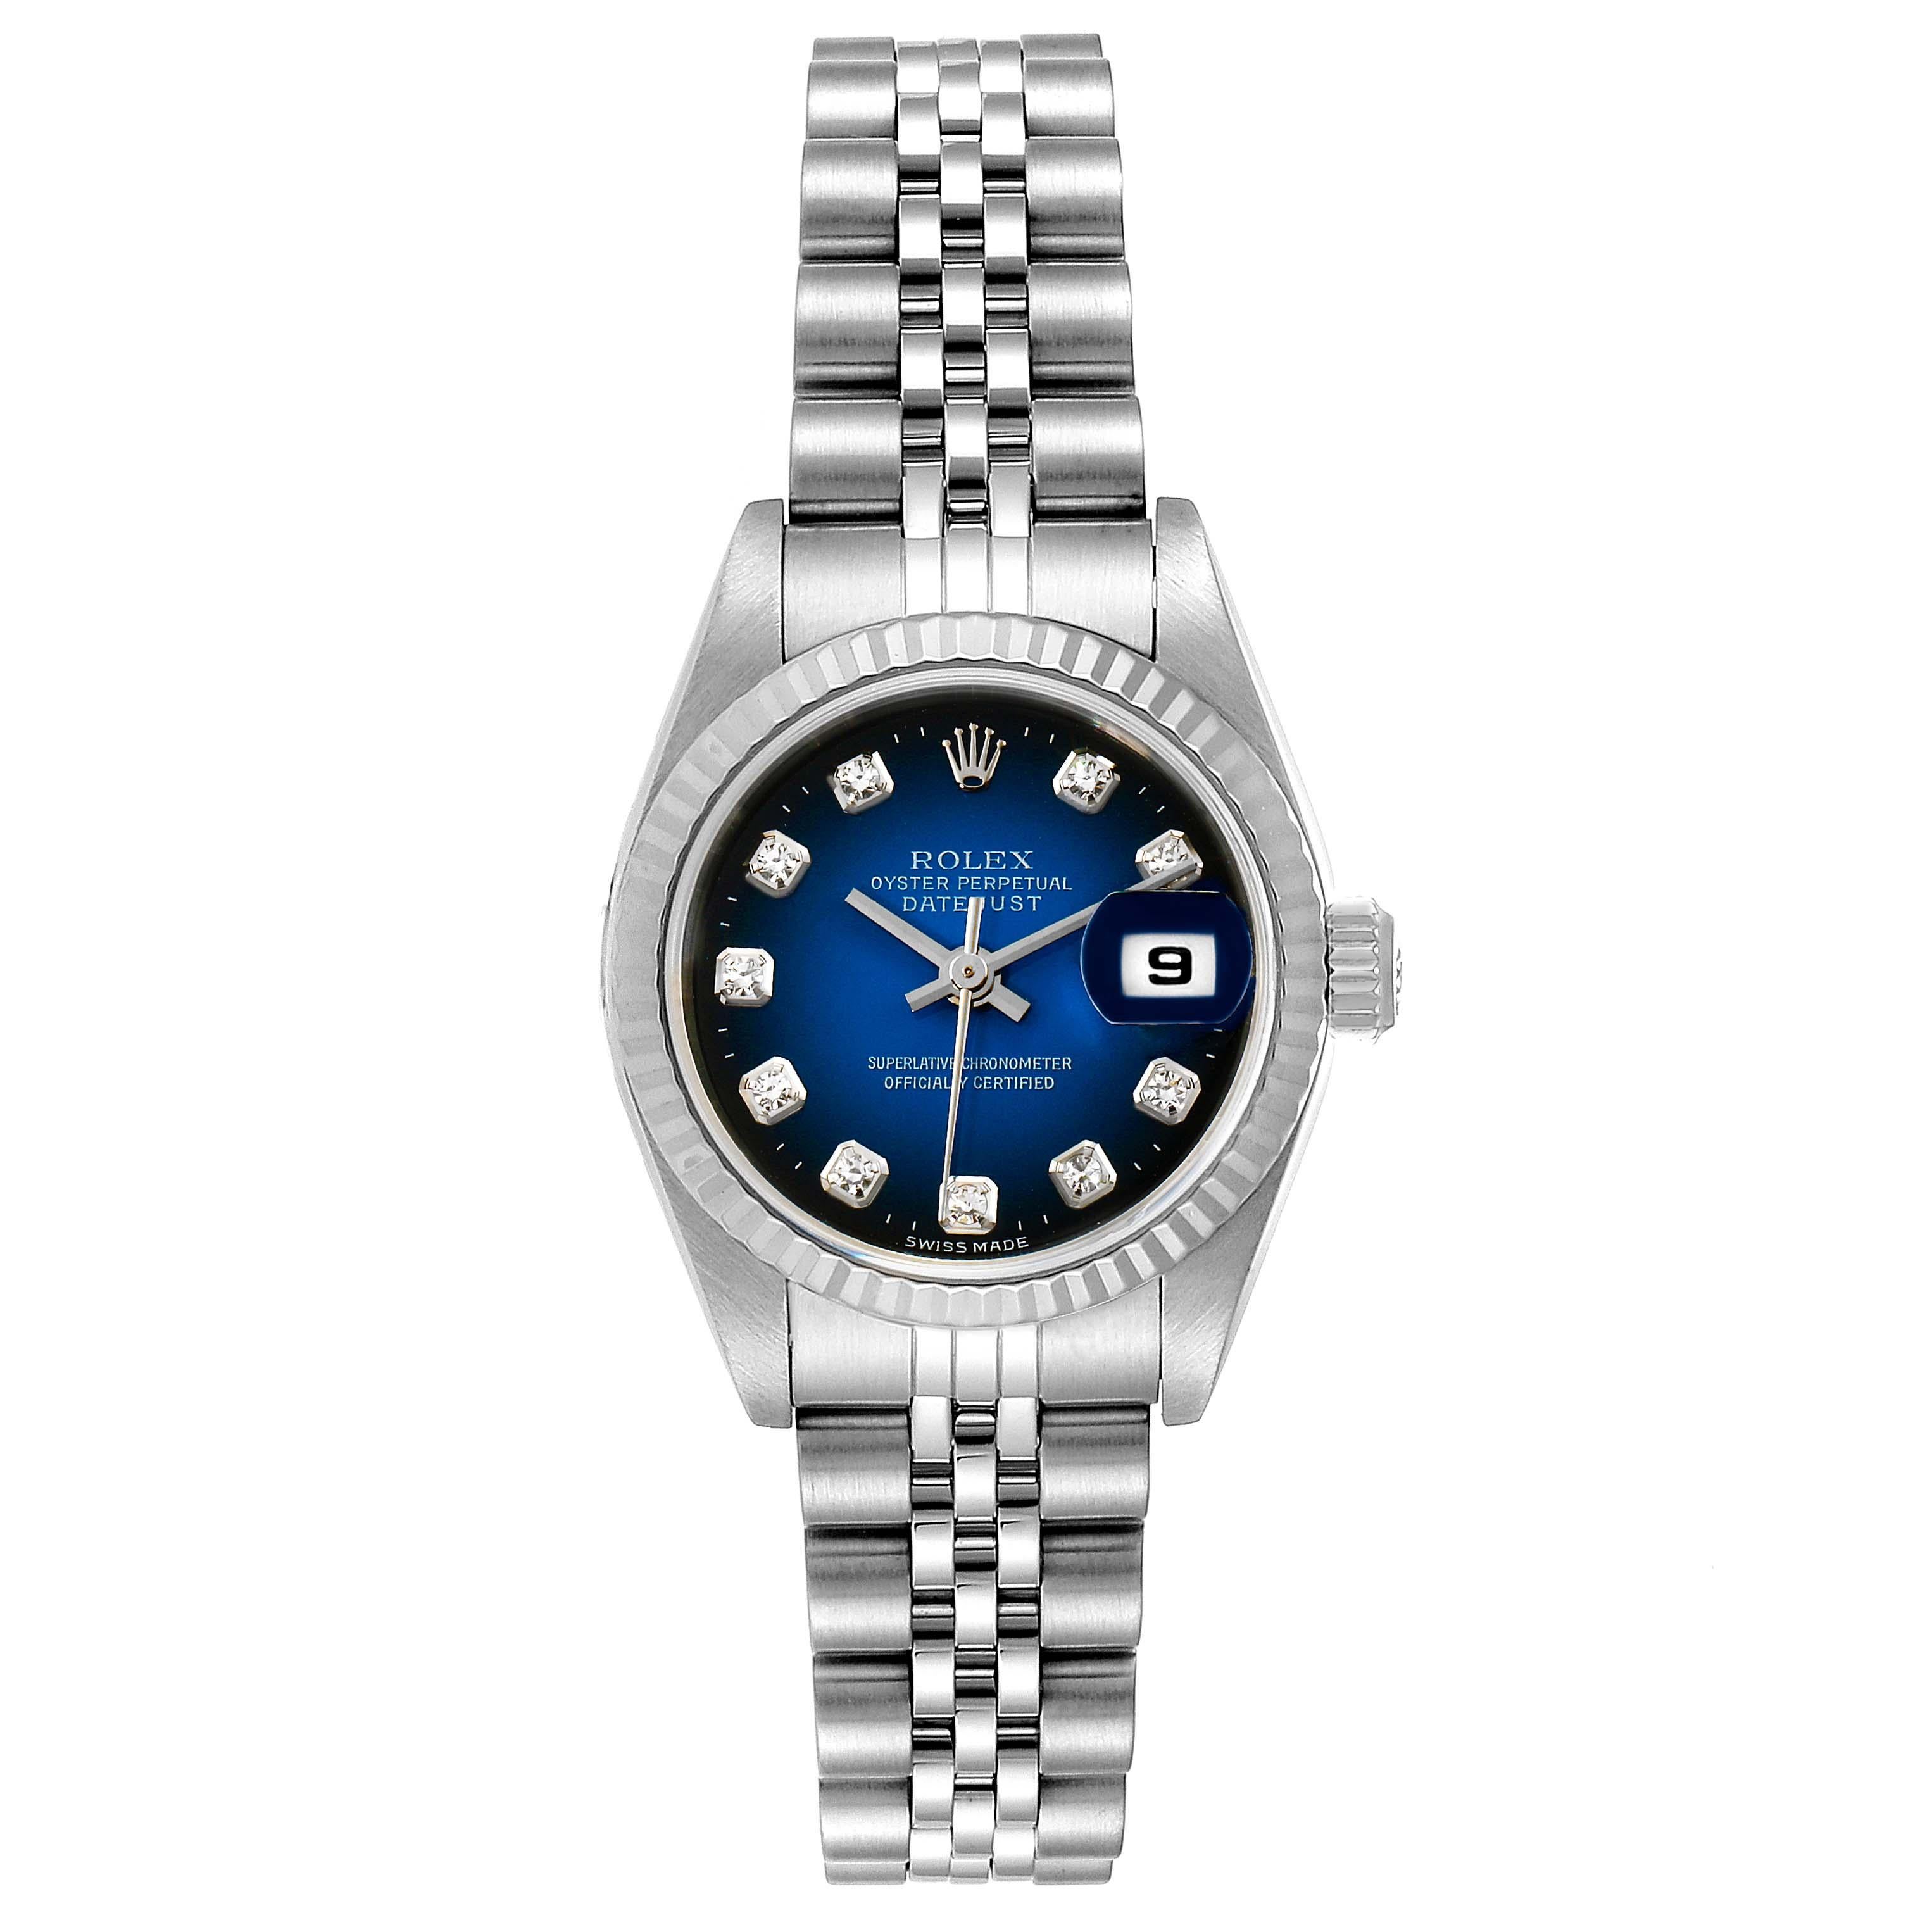 Rolex Datejust Steel White Gold Blue Vignette Diamond Ladies Watch 79174. Officially certified chronometer self-winding movement. Stainless steel oyster case 26.0 mm in diameter. Rolex logo on a crown. 18k white gold fluted bezel. Scratch resistant